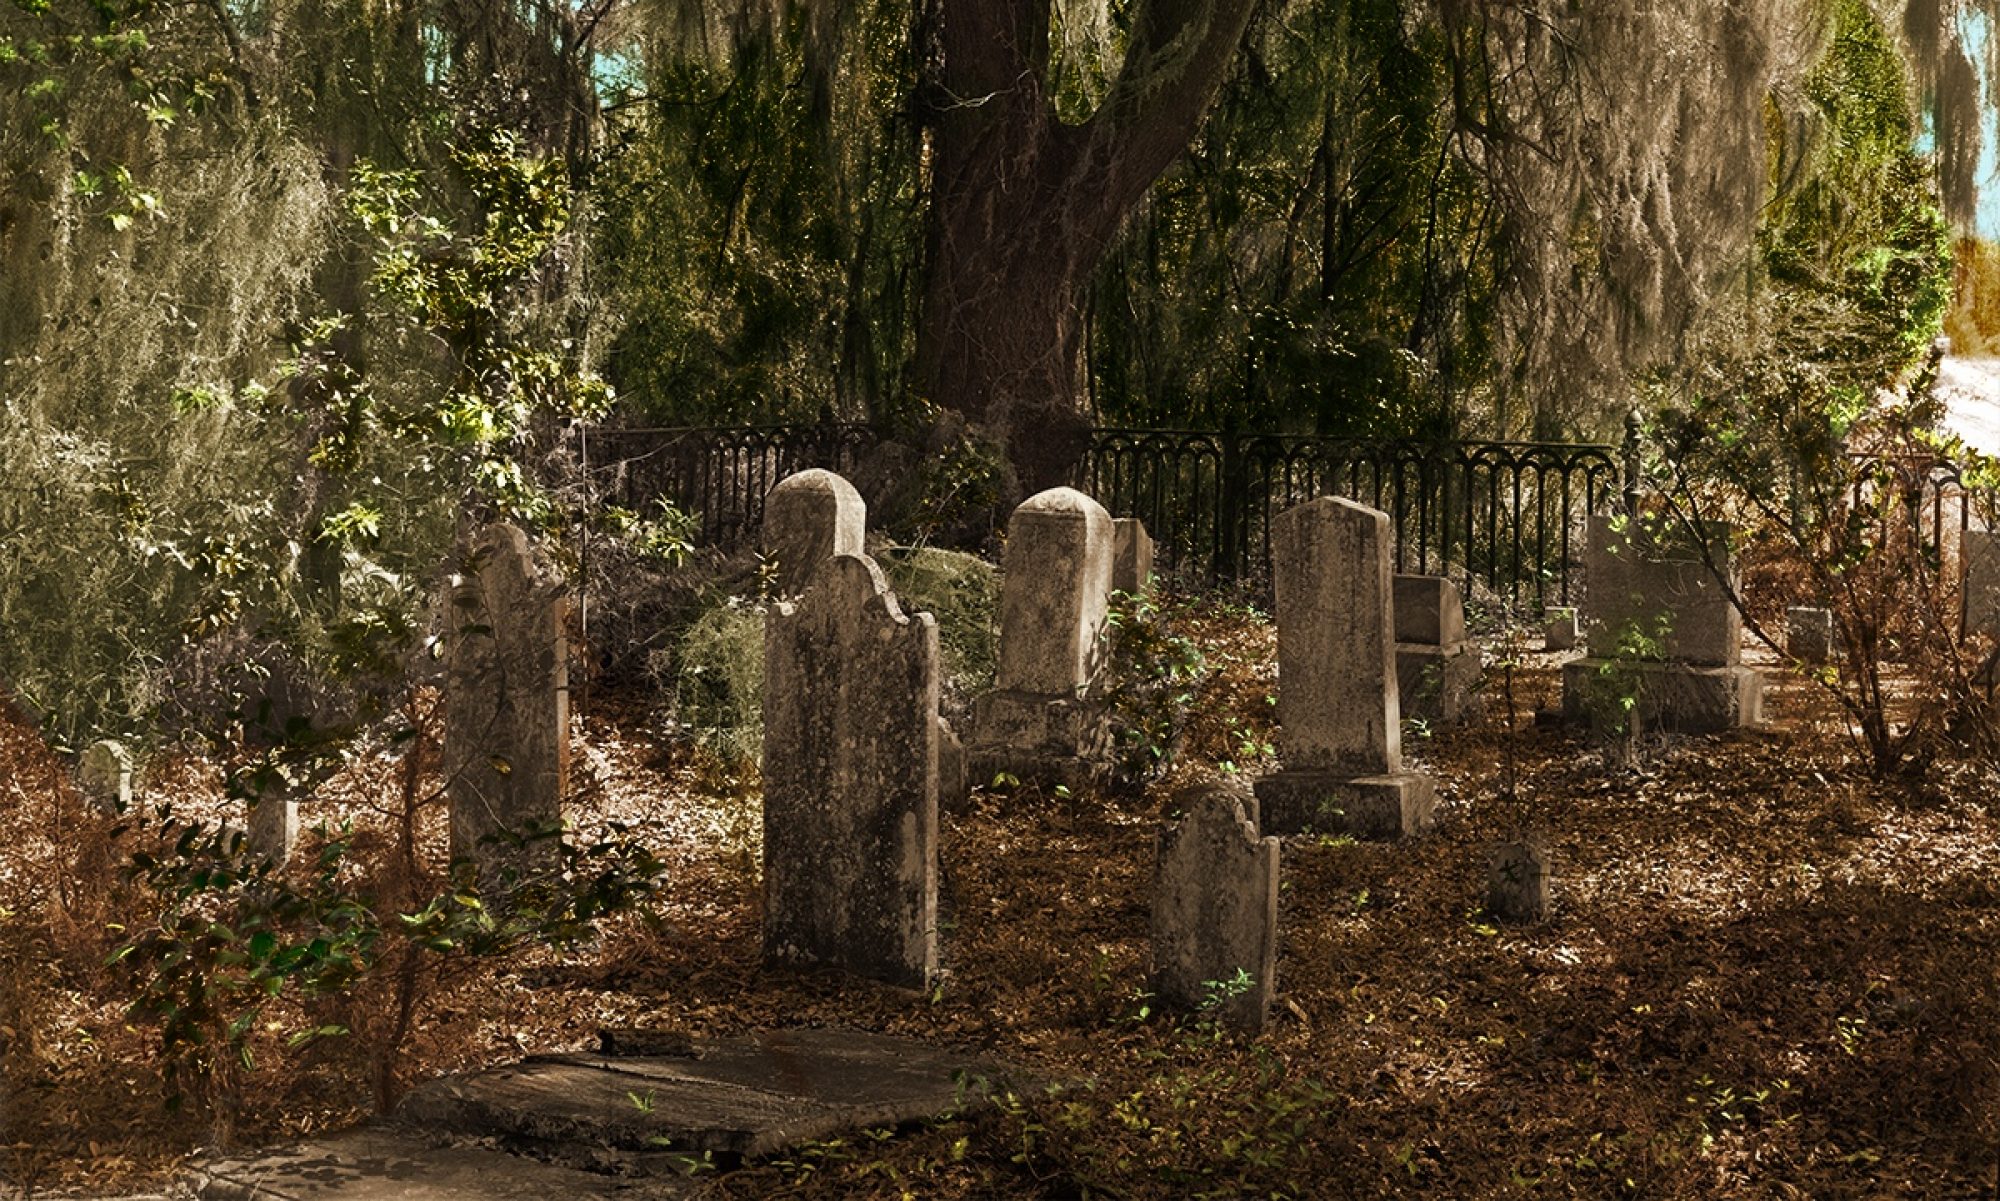 The Cemeteries of the SRS